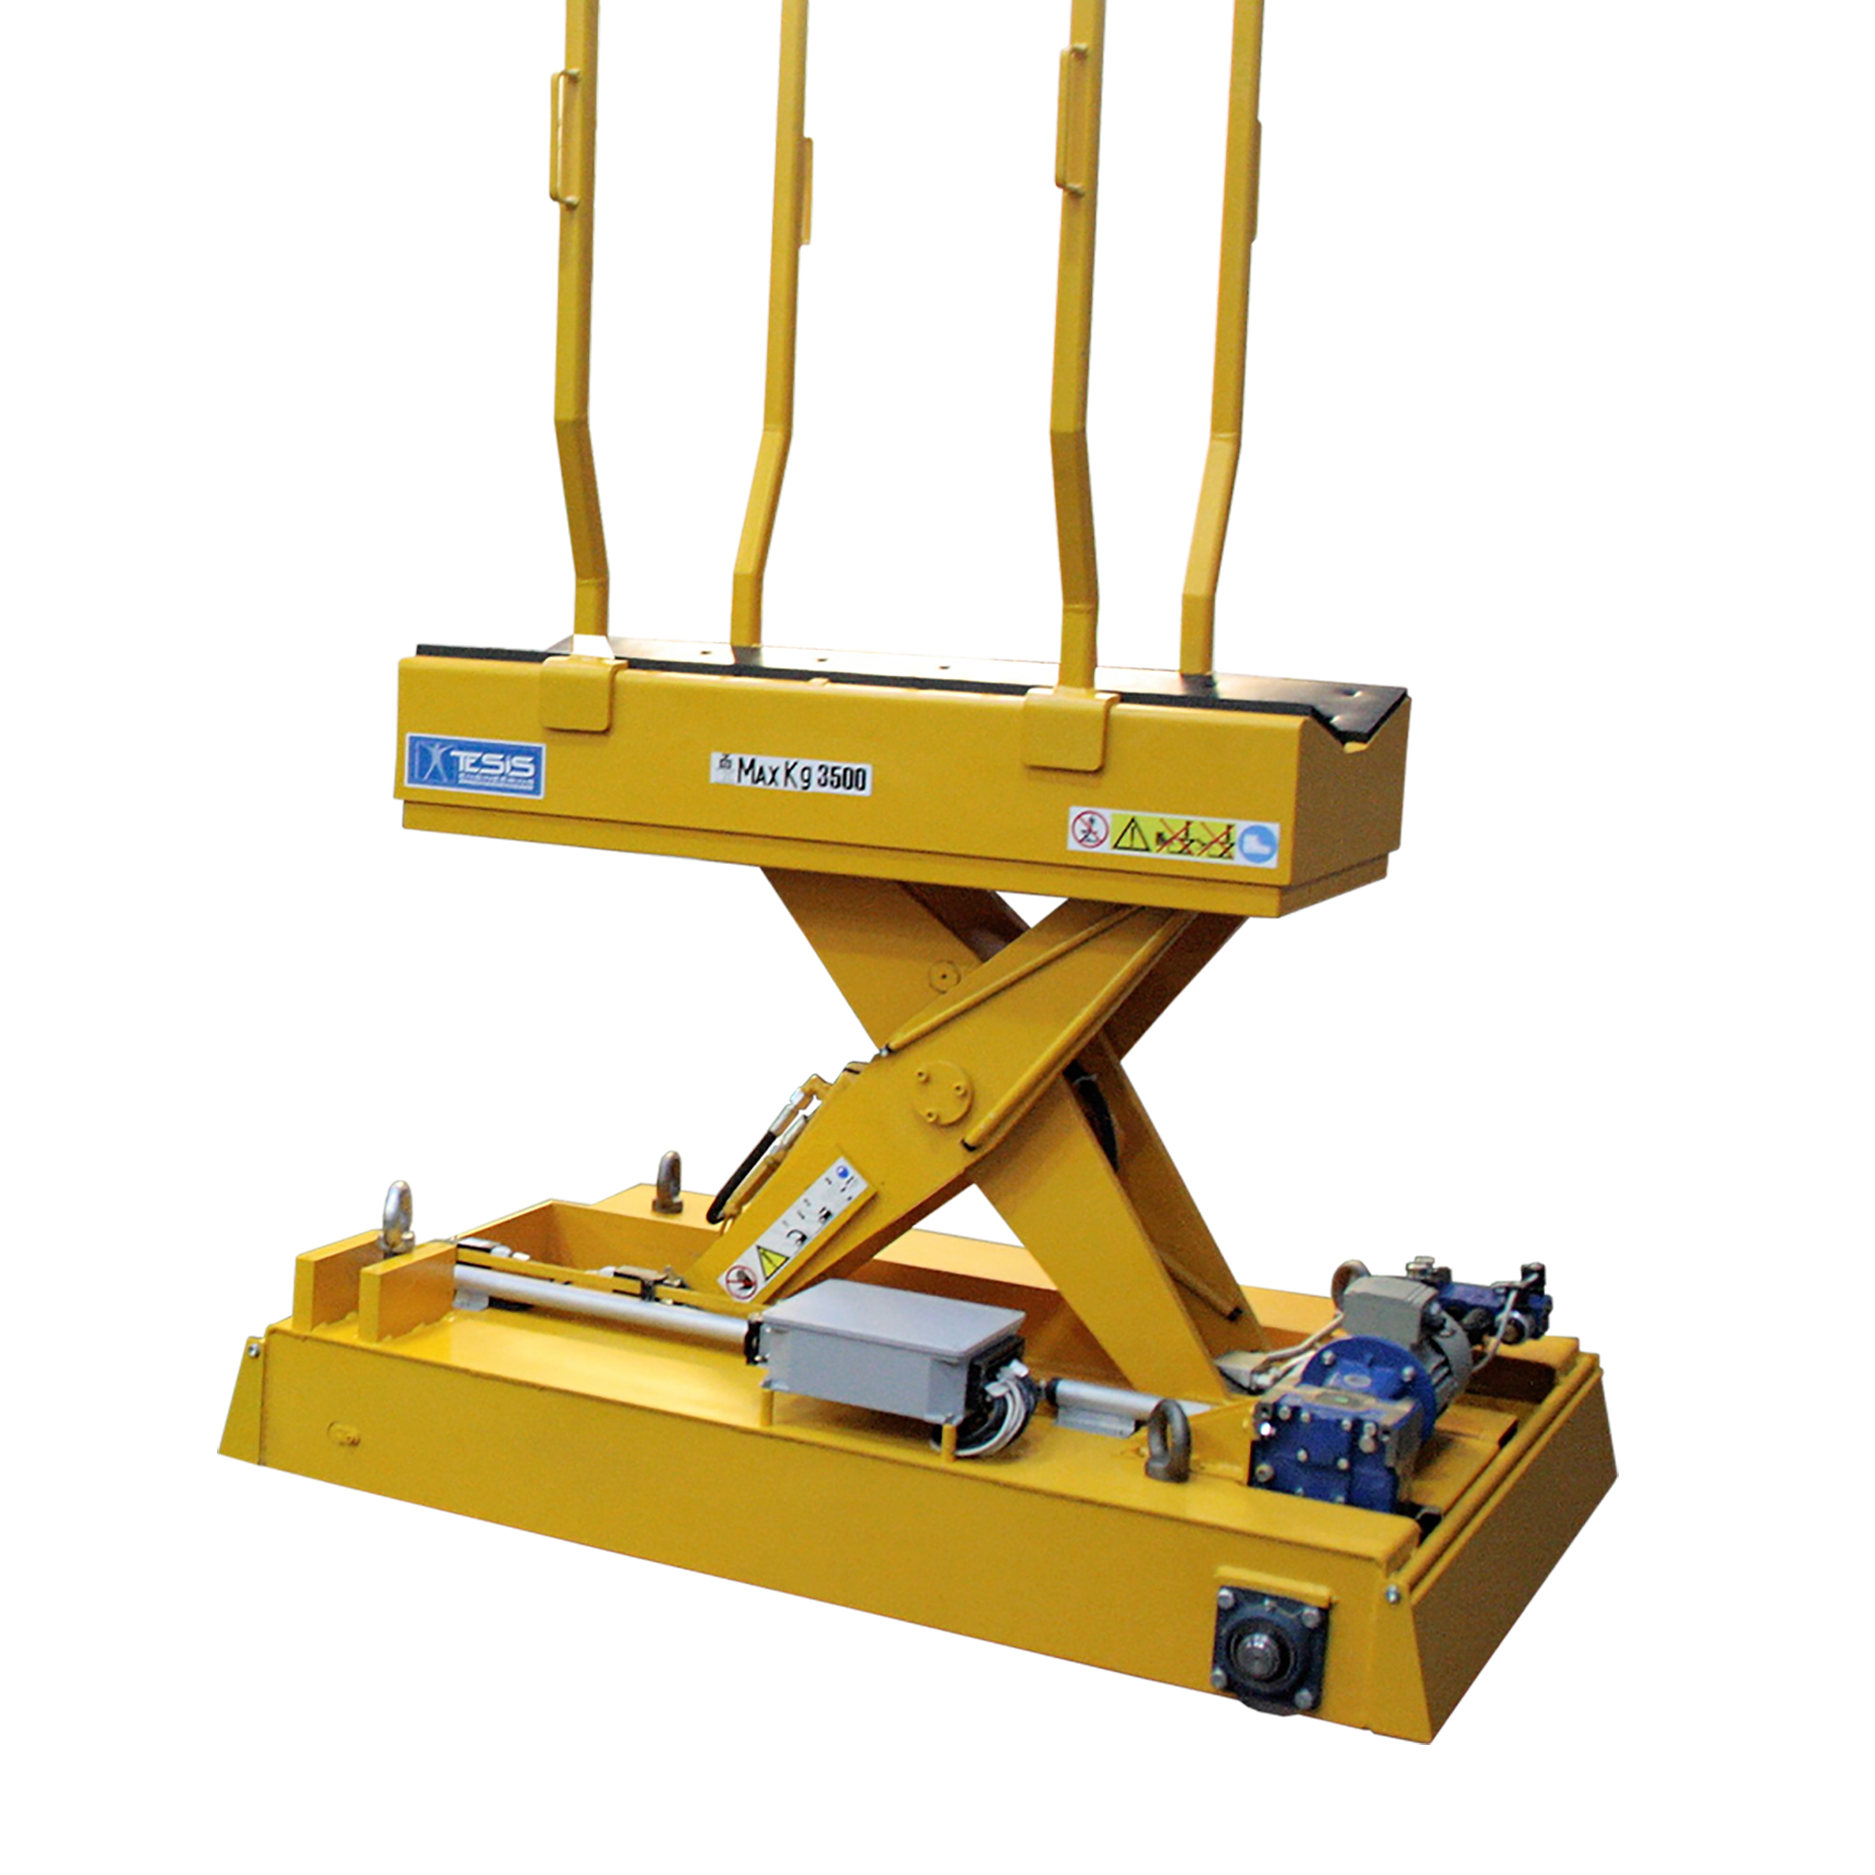 Coil handling cart, coil transfer car, coil lifting equipment, coil cradle lift table, reel handling, reel lifting, sel-propelled lift table, coil lift